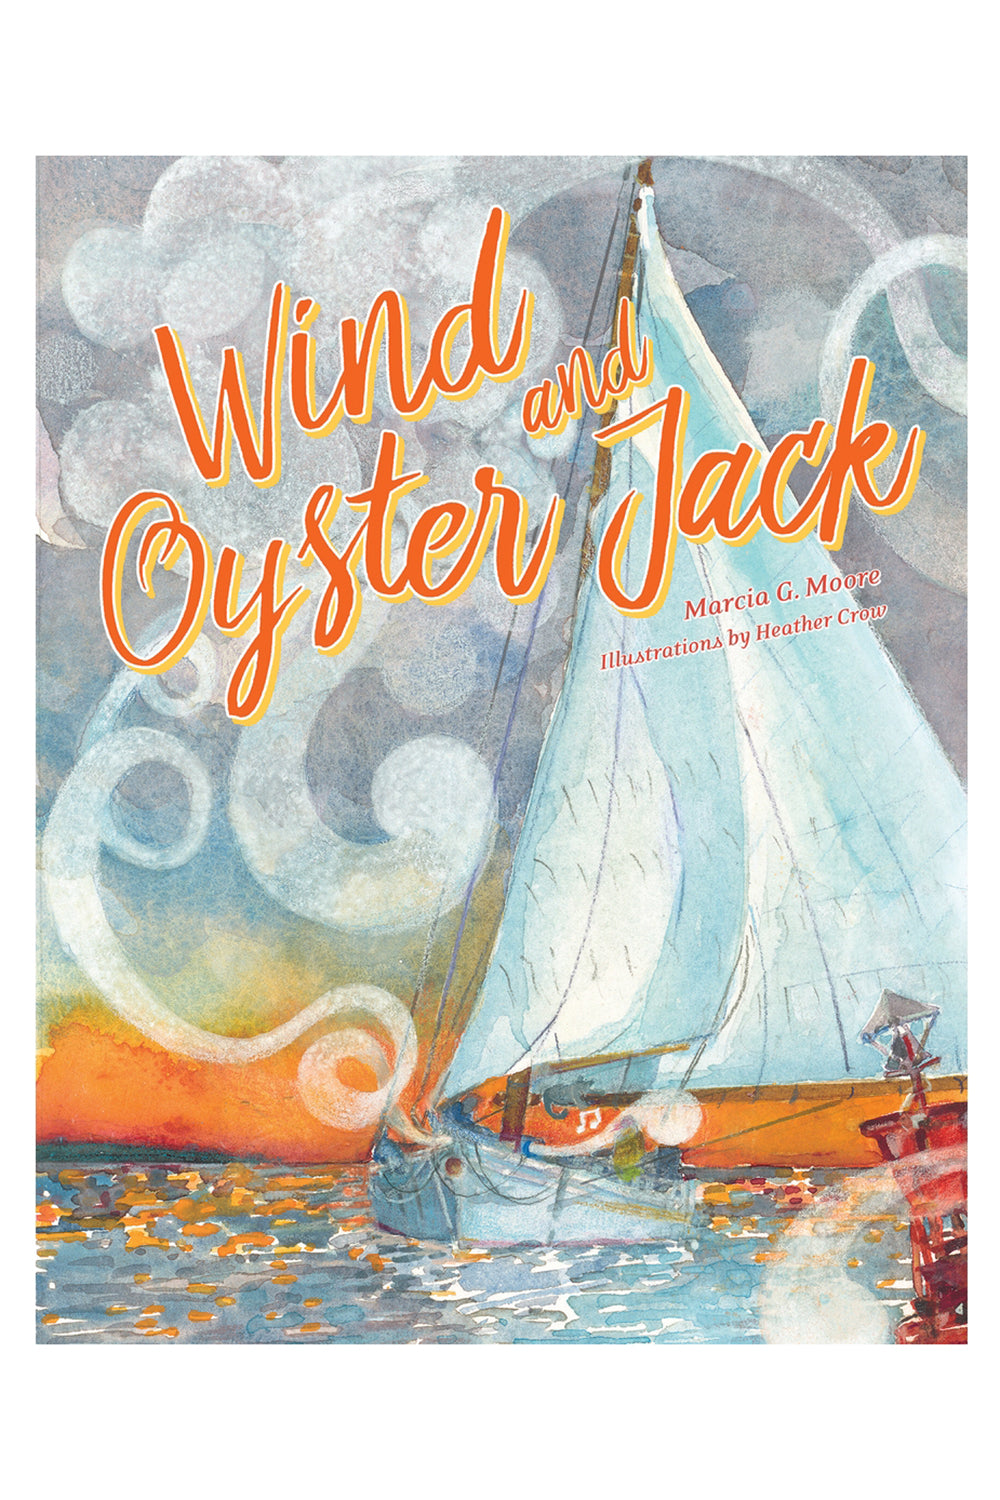 Wind and Oyster Jack Book